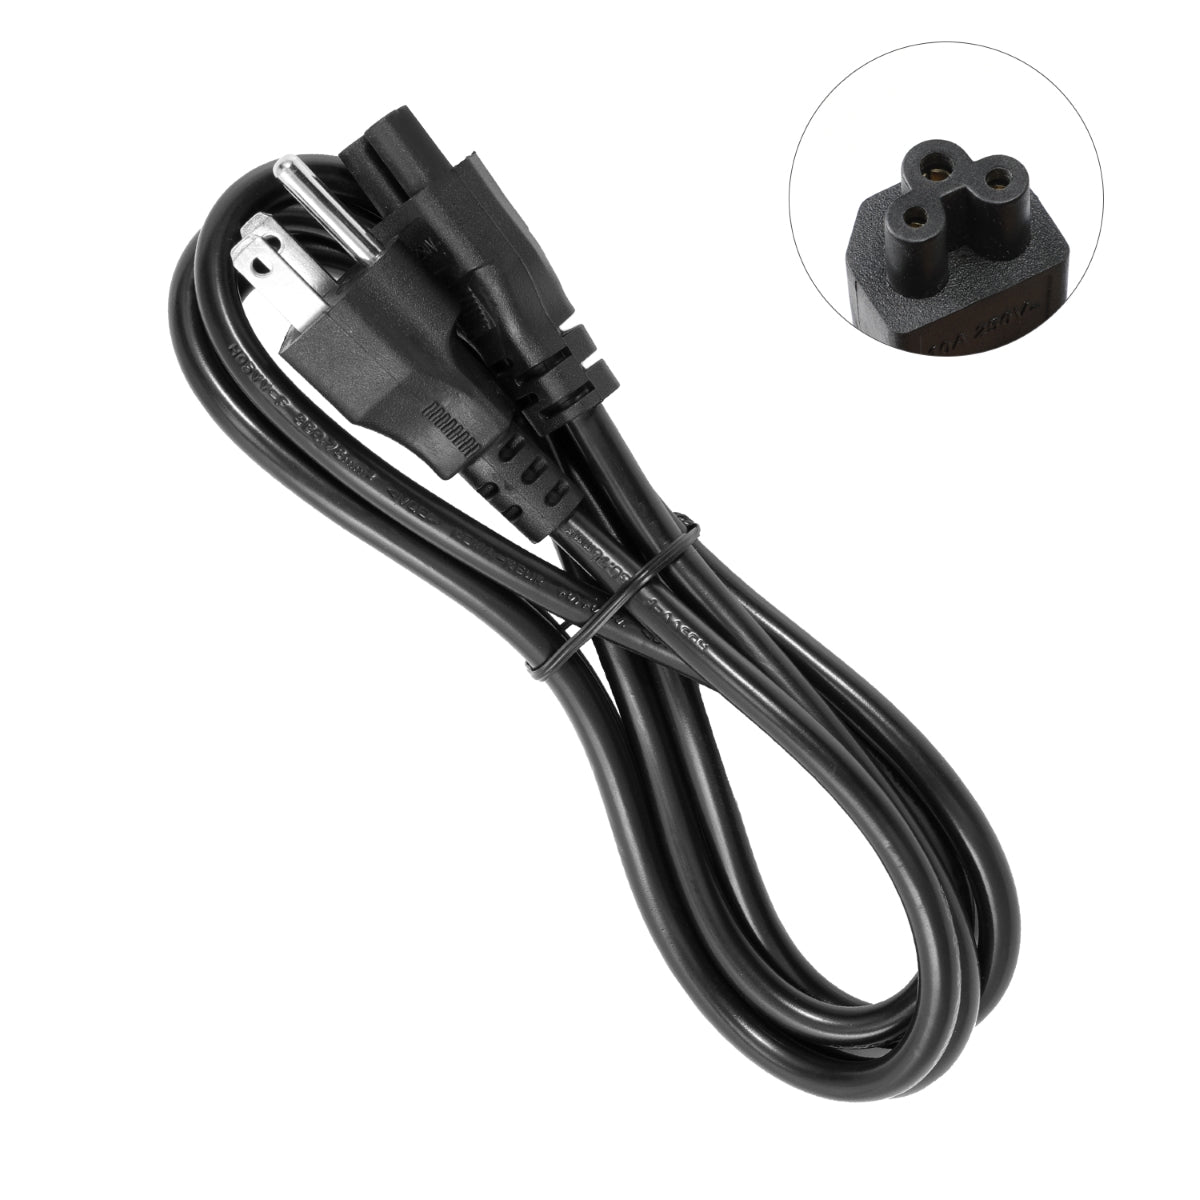 Power Cord for LG 55LN5600 Monitor.